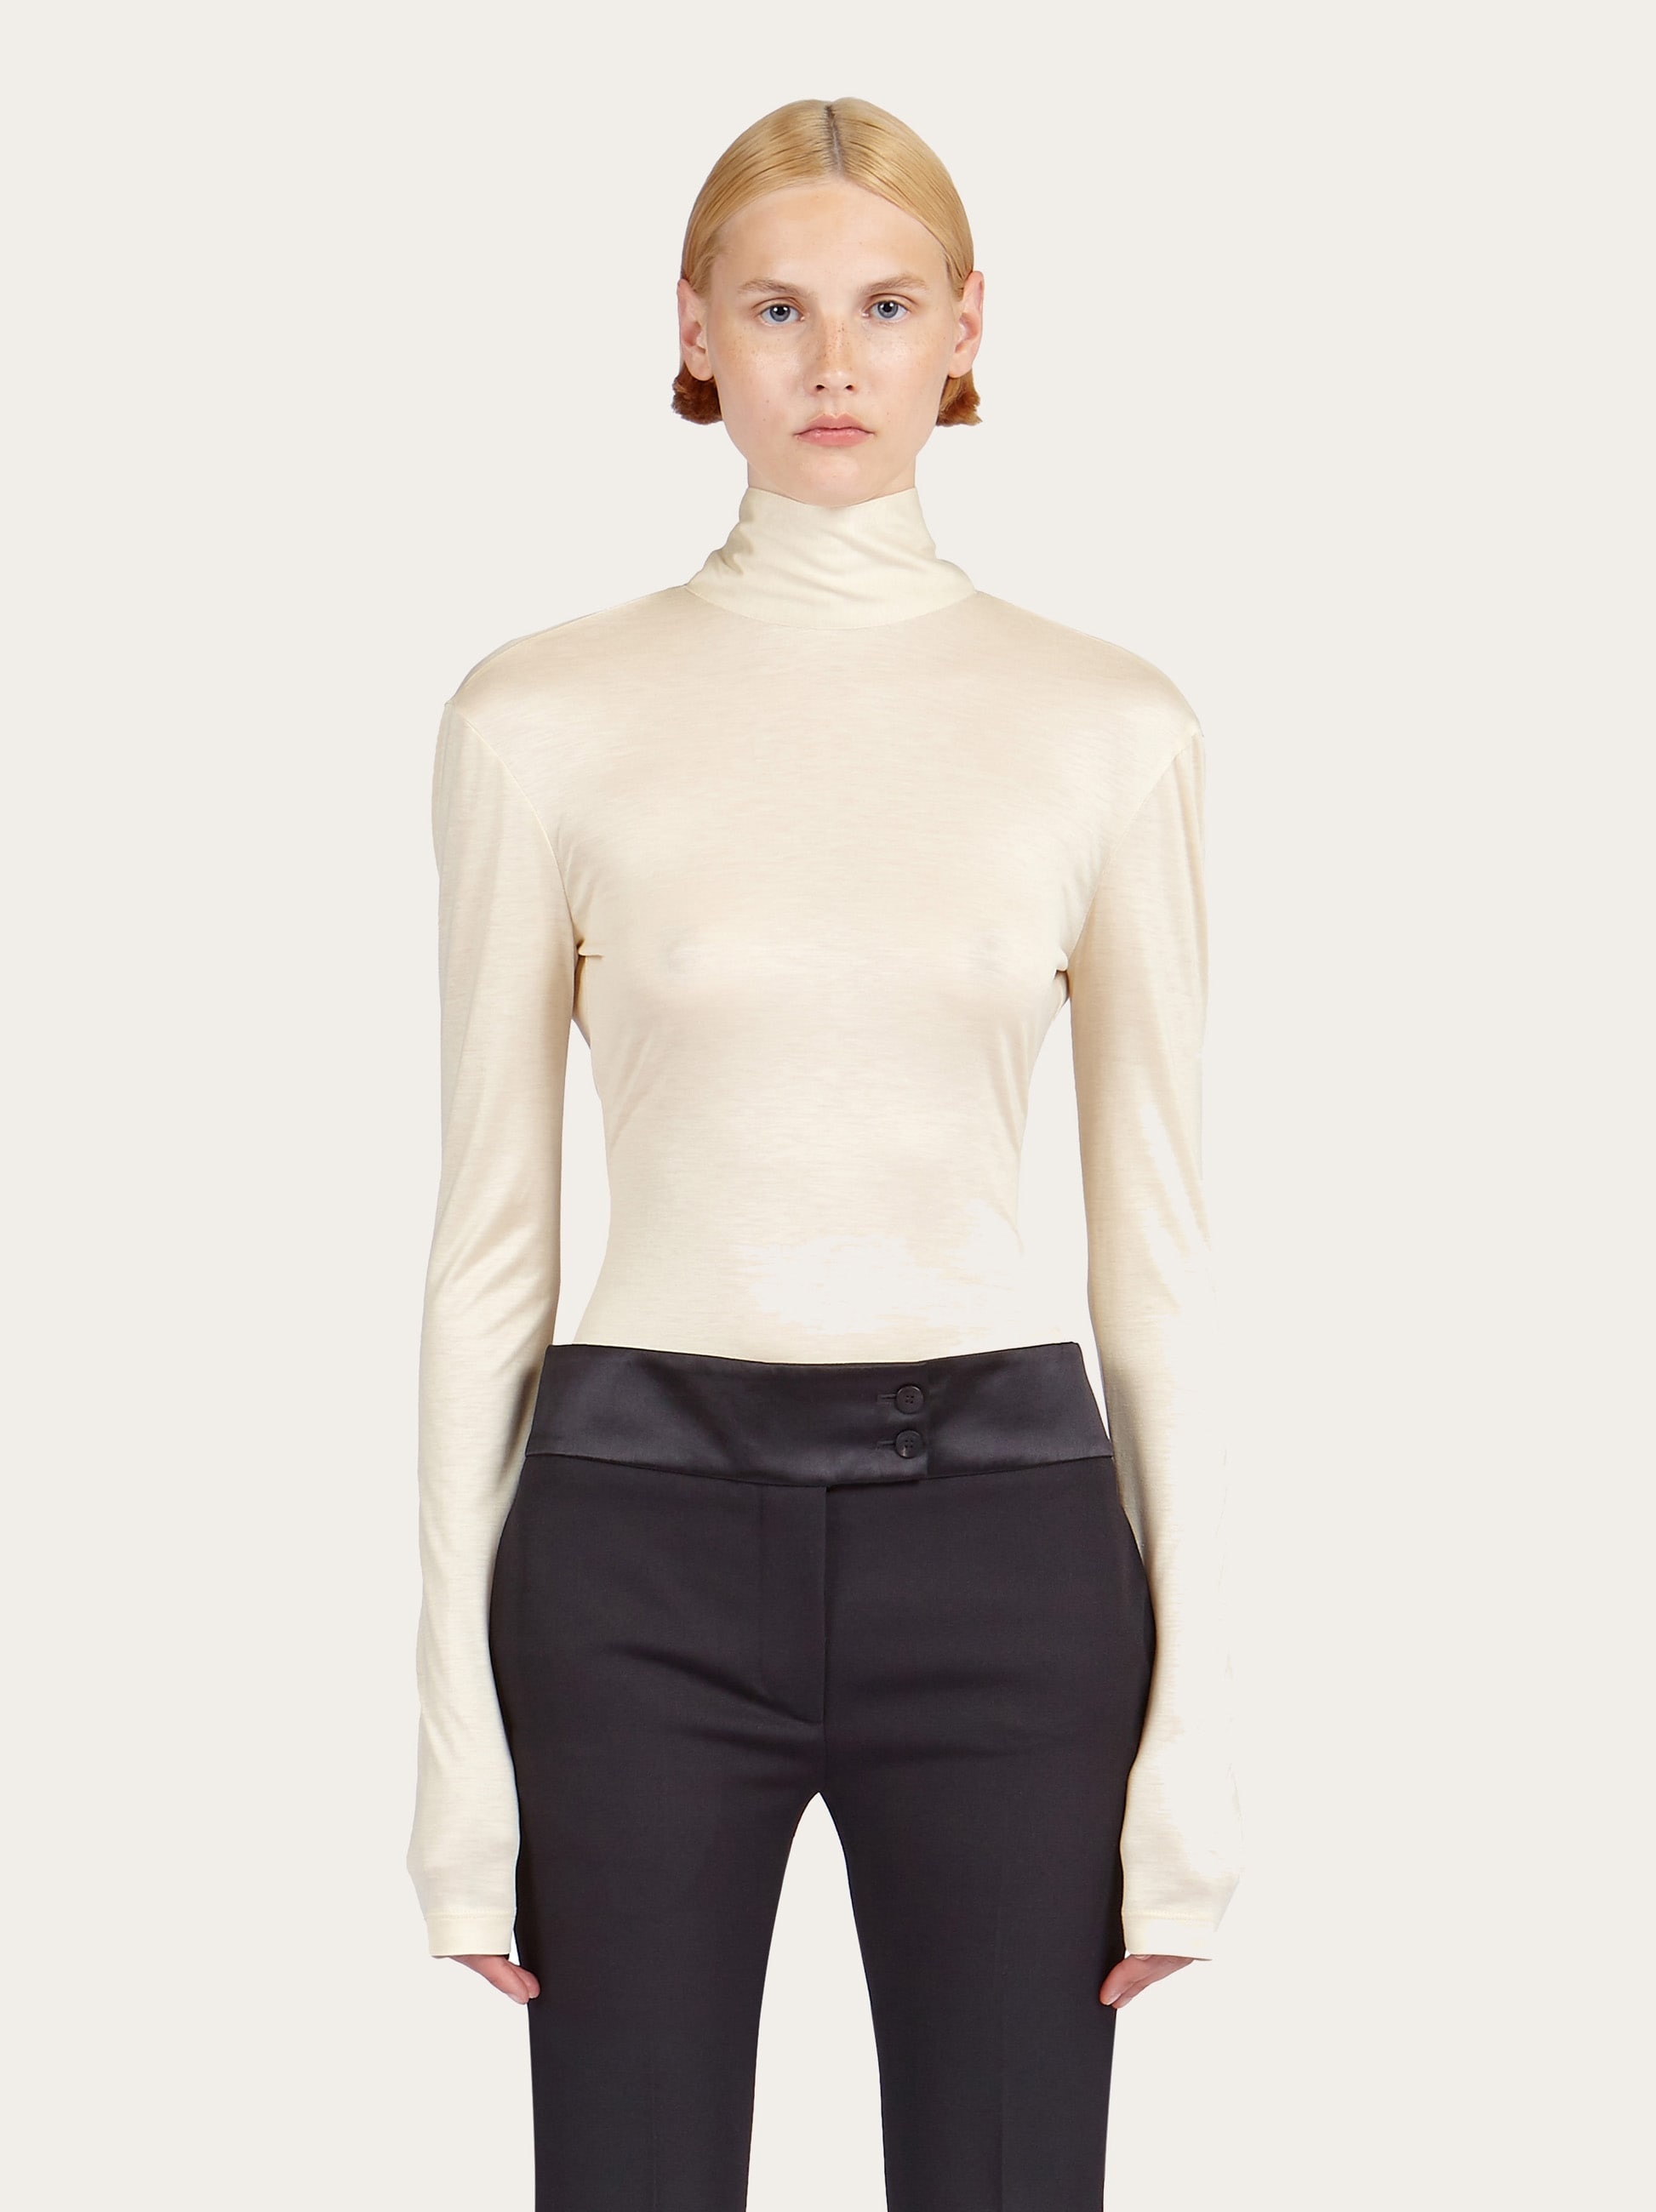 Jersey turtleneck with low cut back - 2